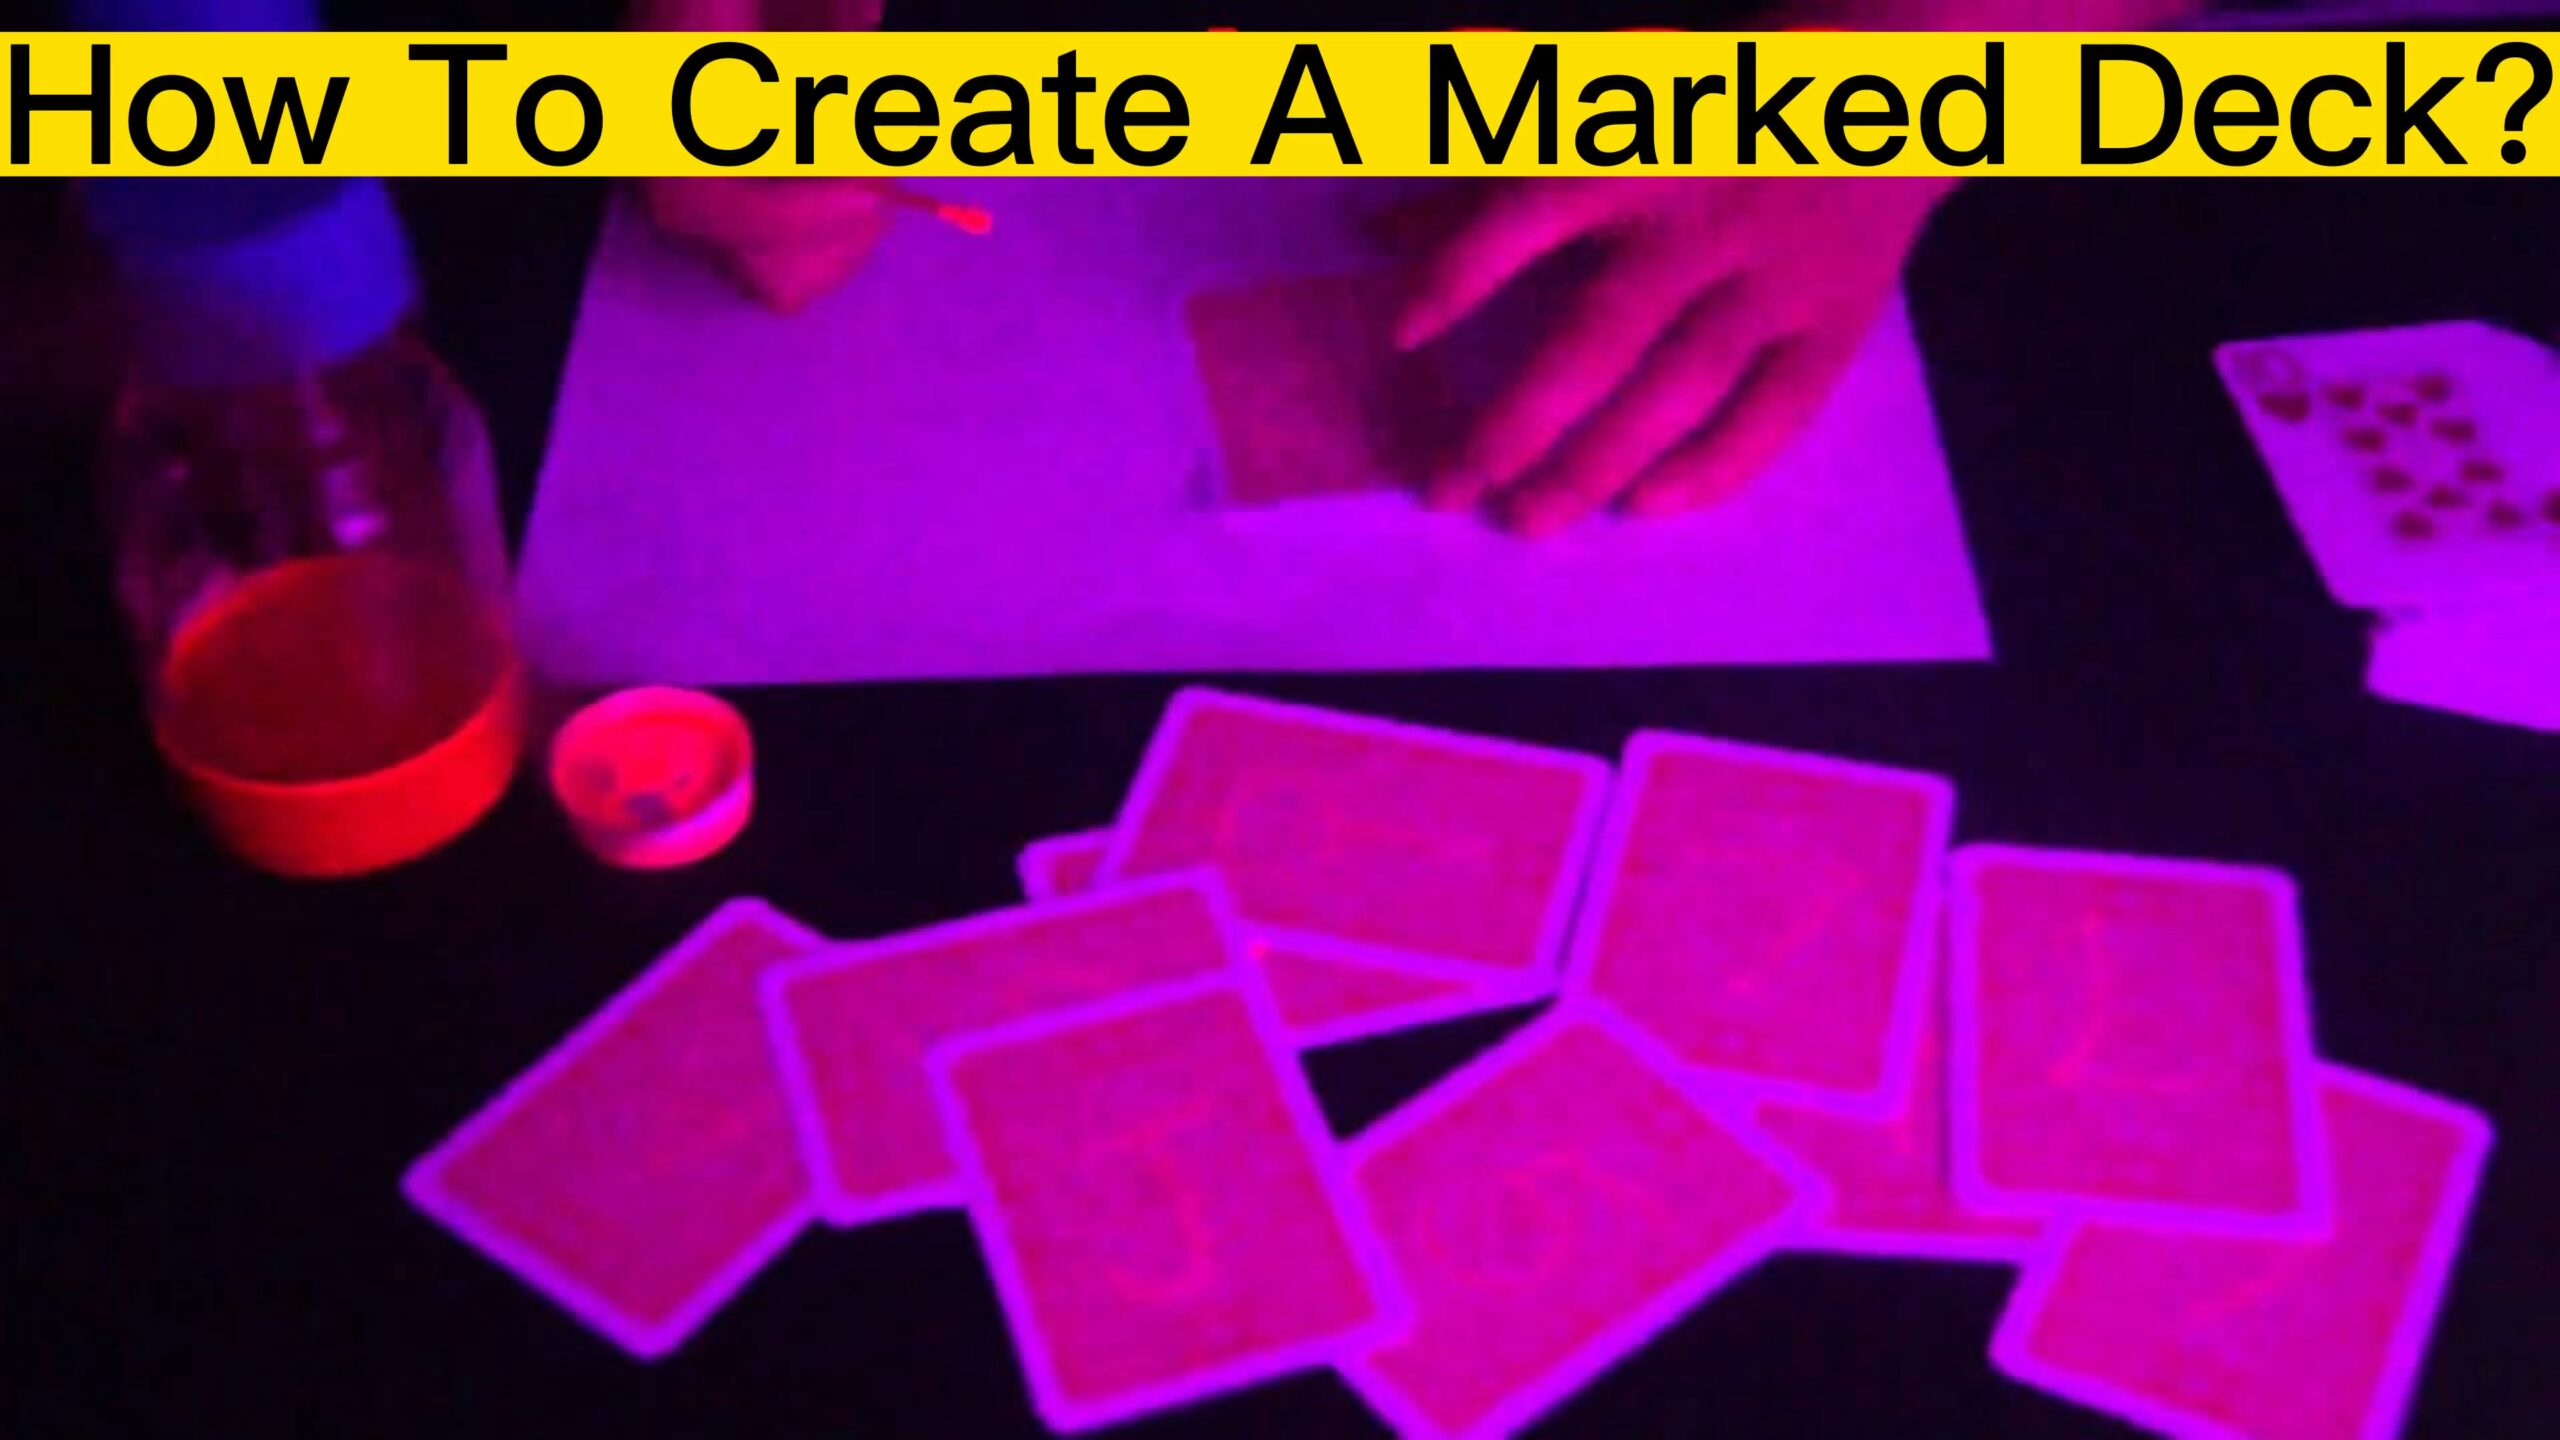 How To Create A Marked Deck